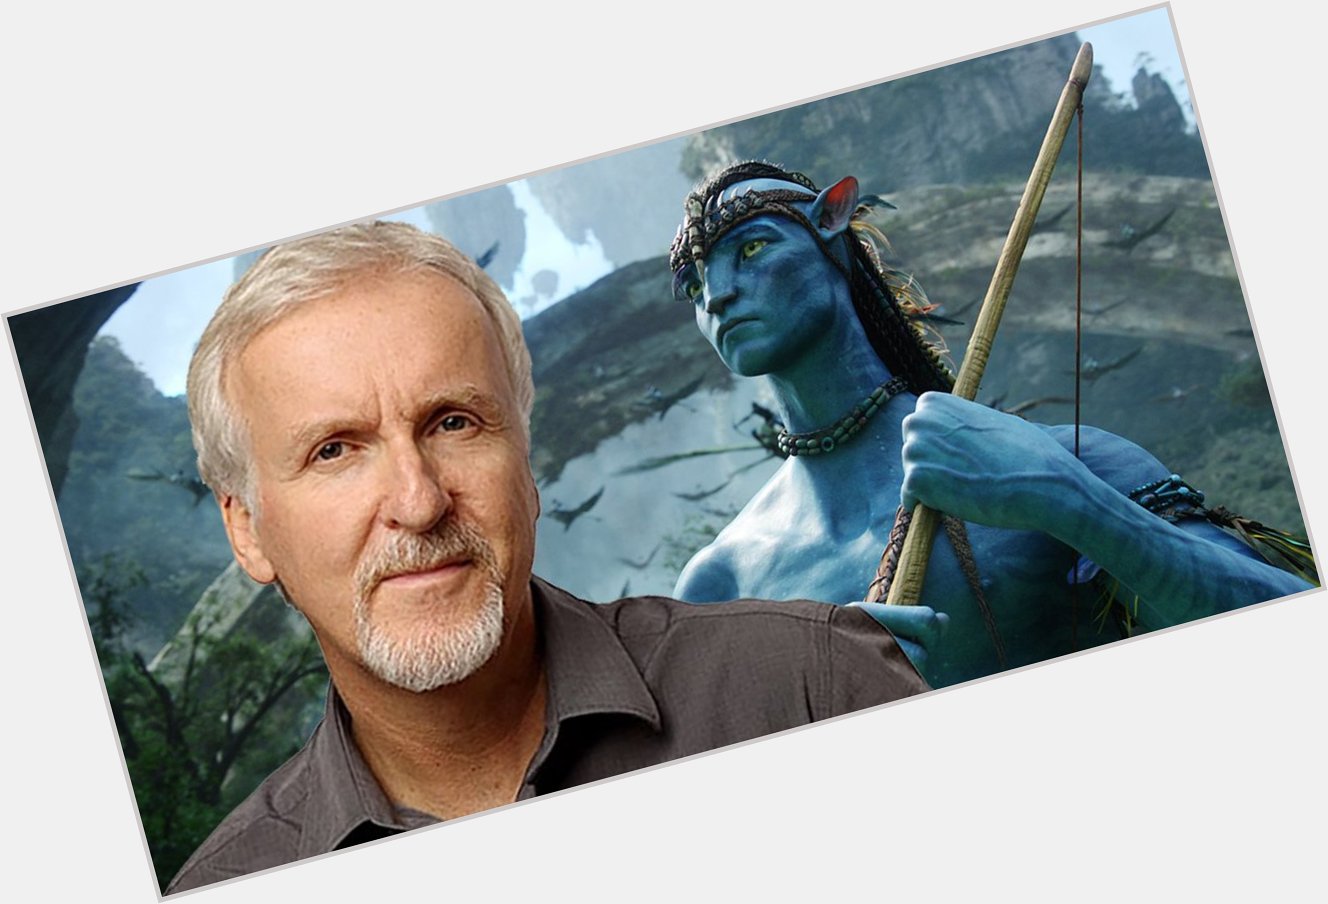 August 16, 2020
Happy birthday to director James Cameron 66 years old. 